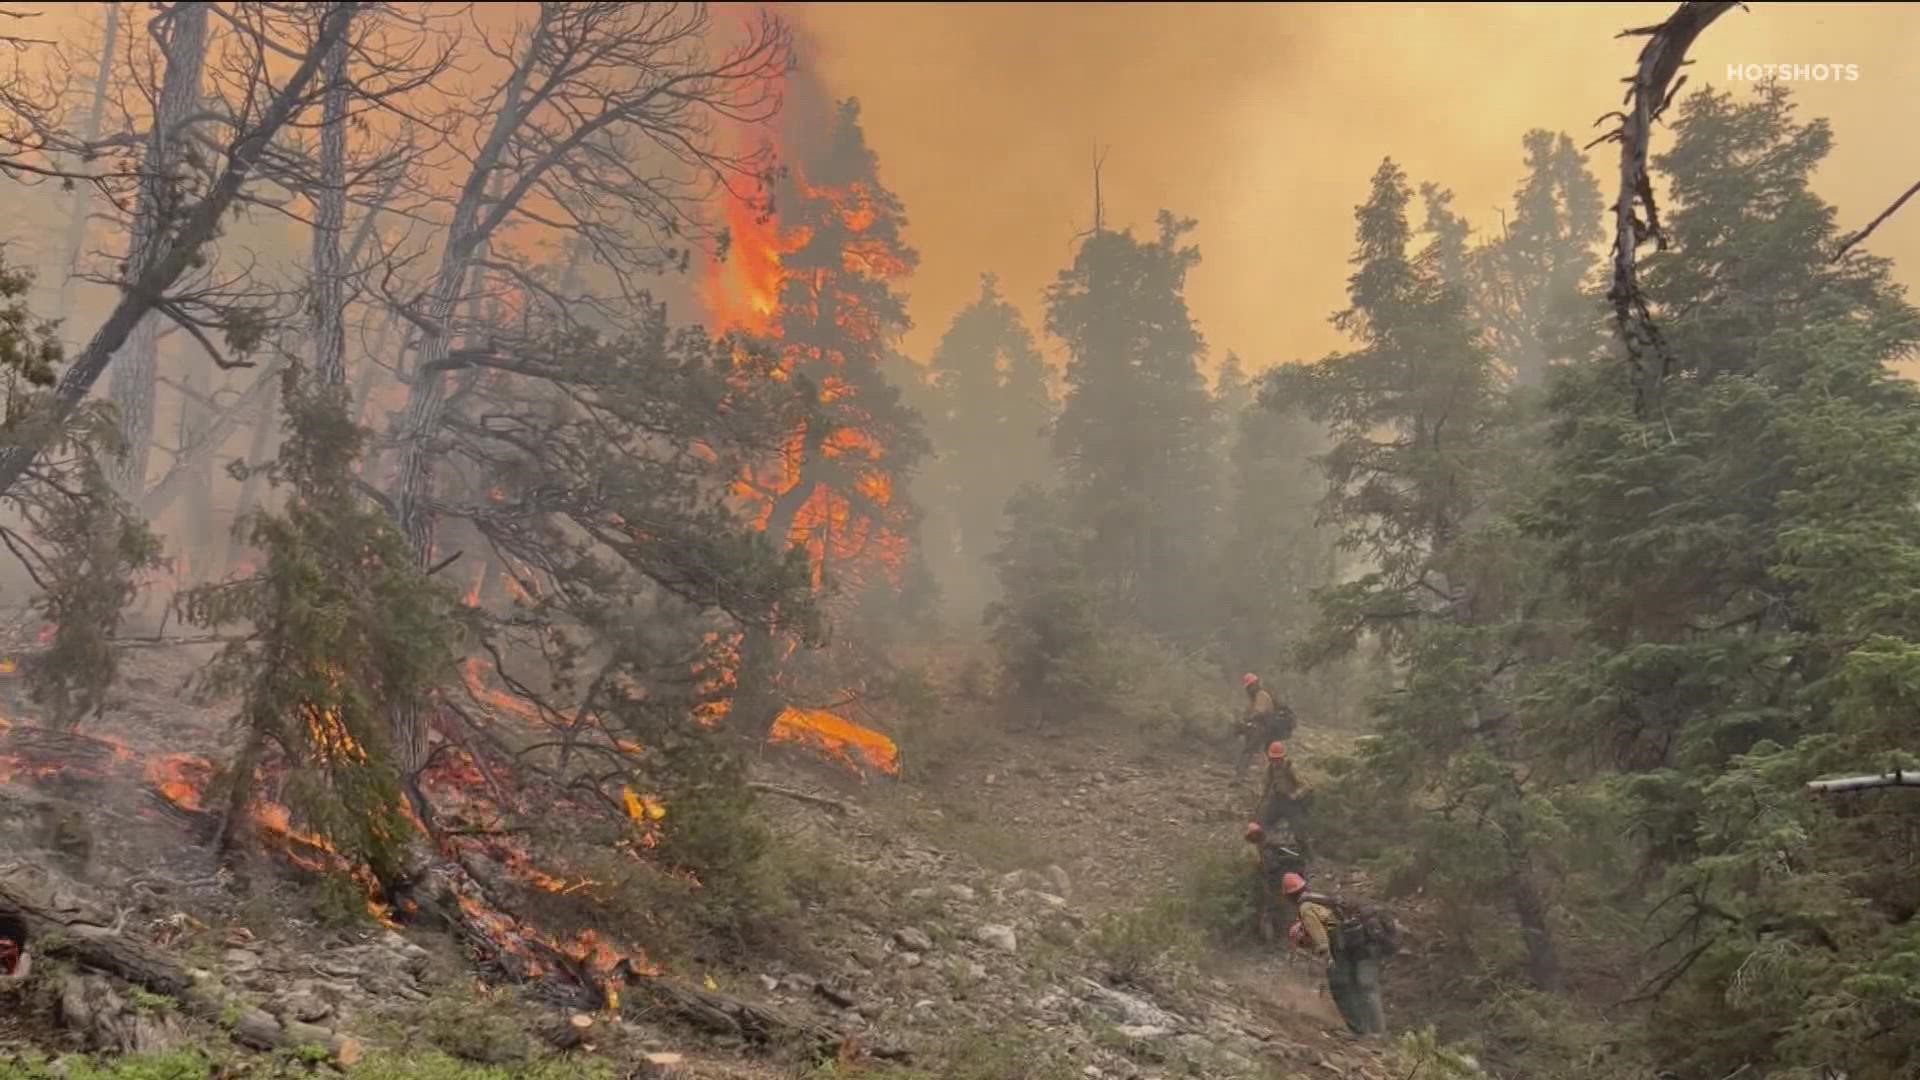 Idaho City’s Hotshot Crew work in the woods. We don’t often see them, but they work 24/7 to fight fires like the Moose Fire. Now, they are spreading awareness.